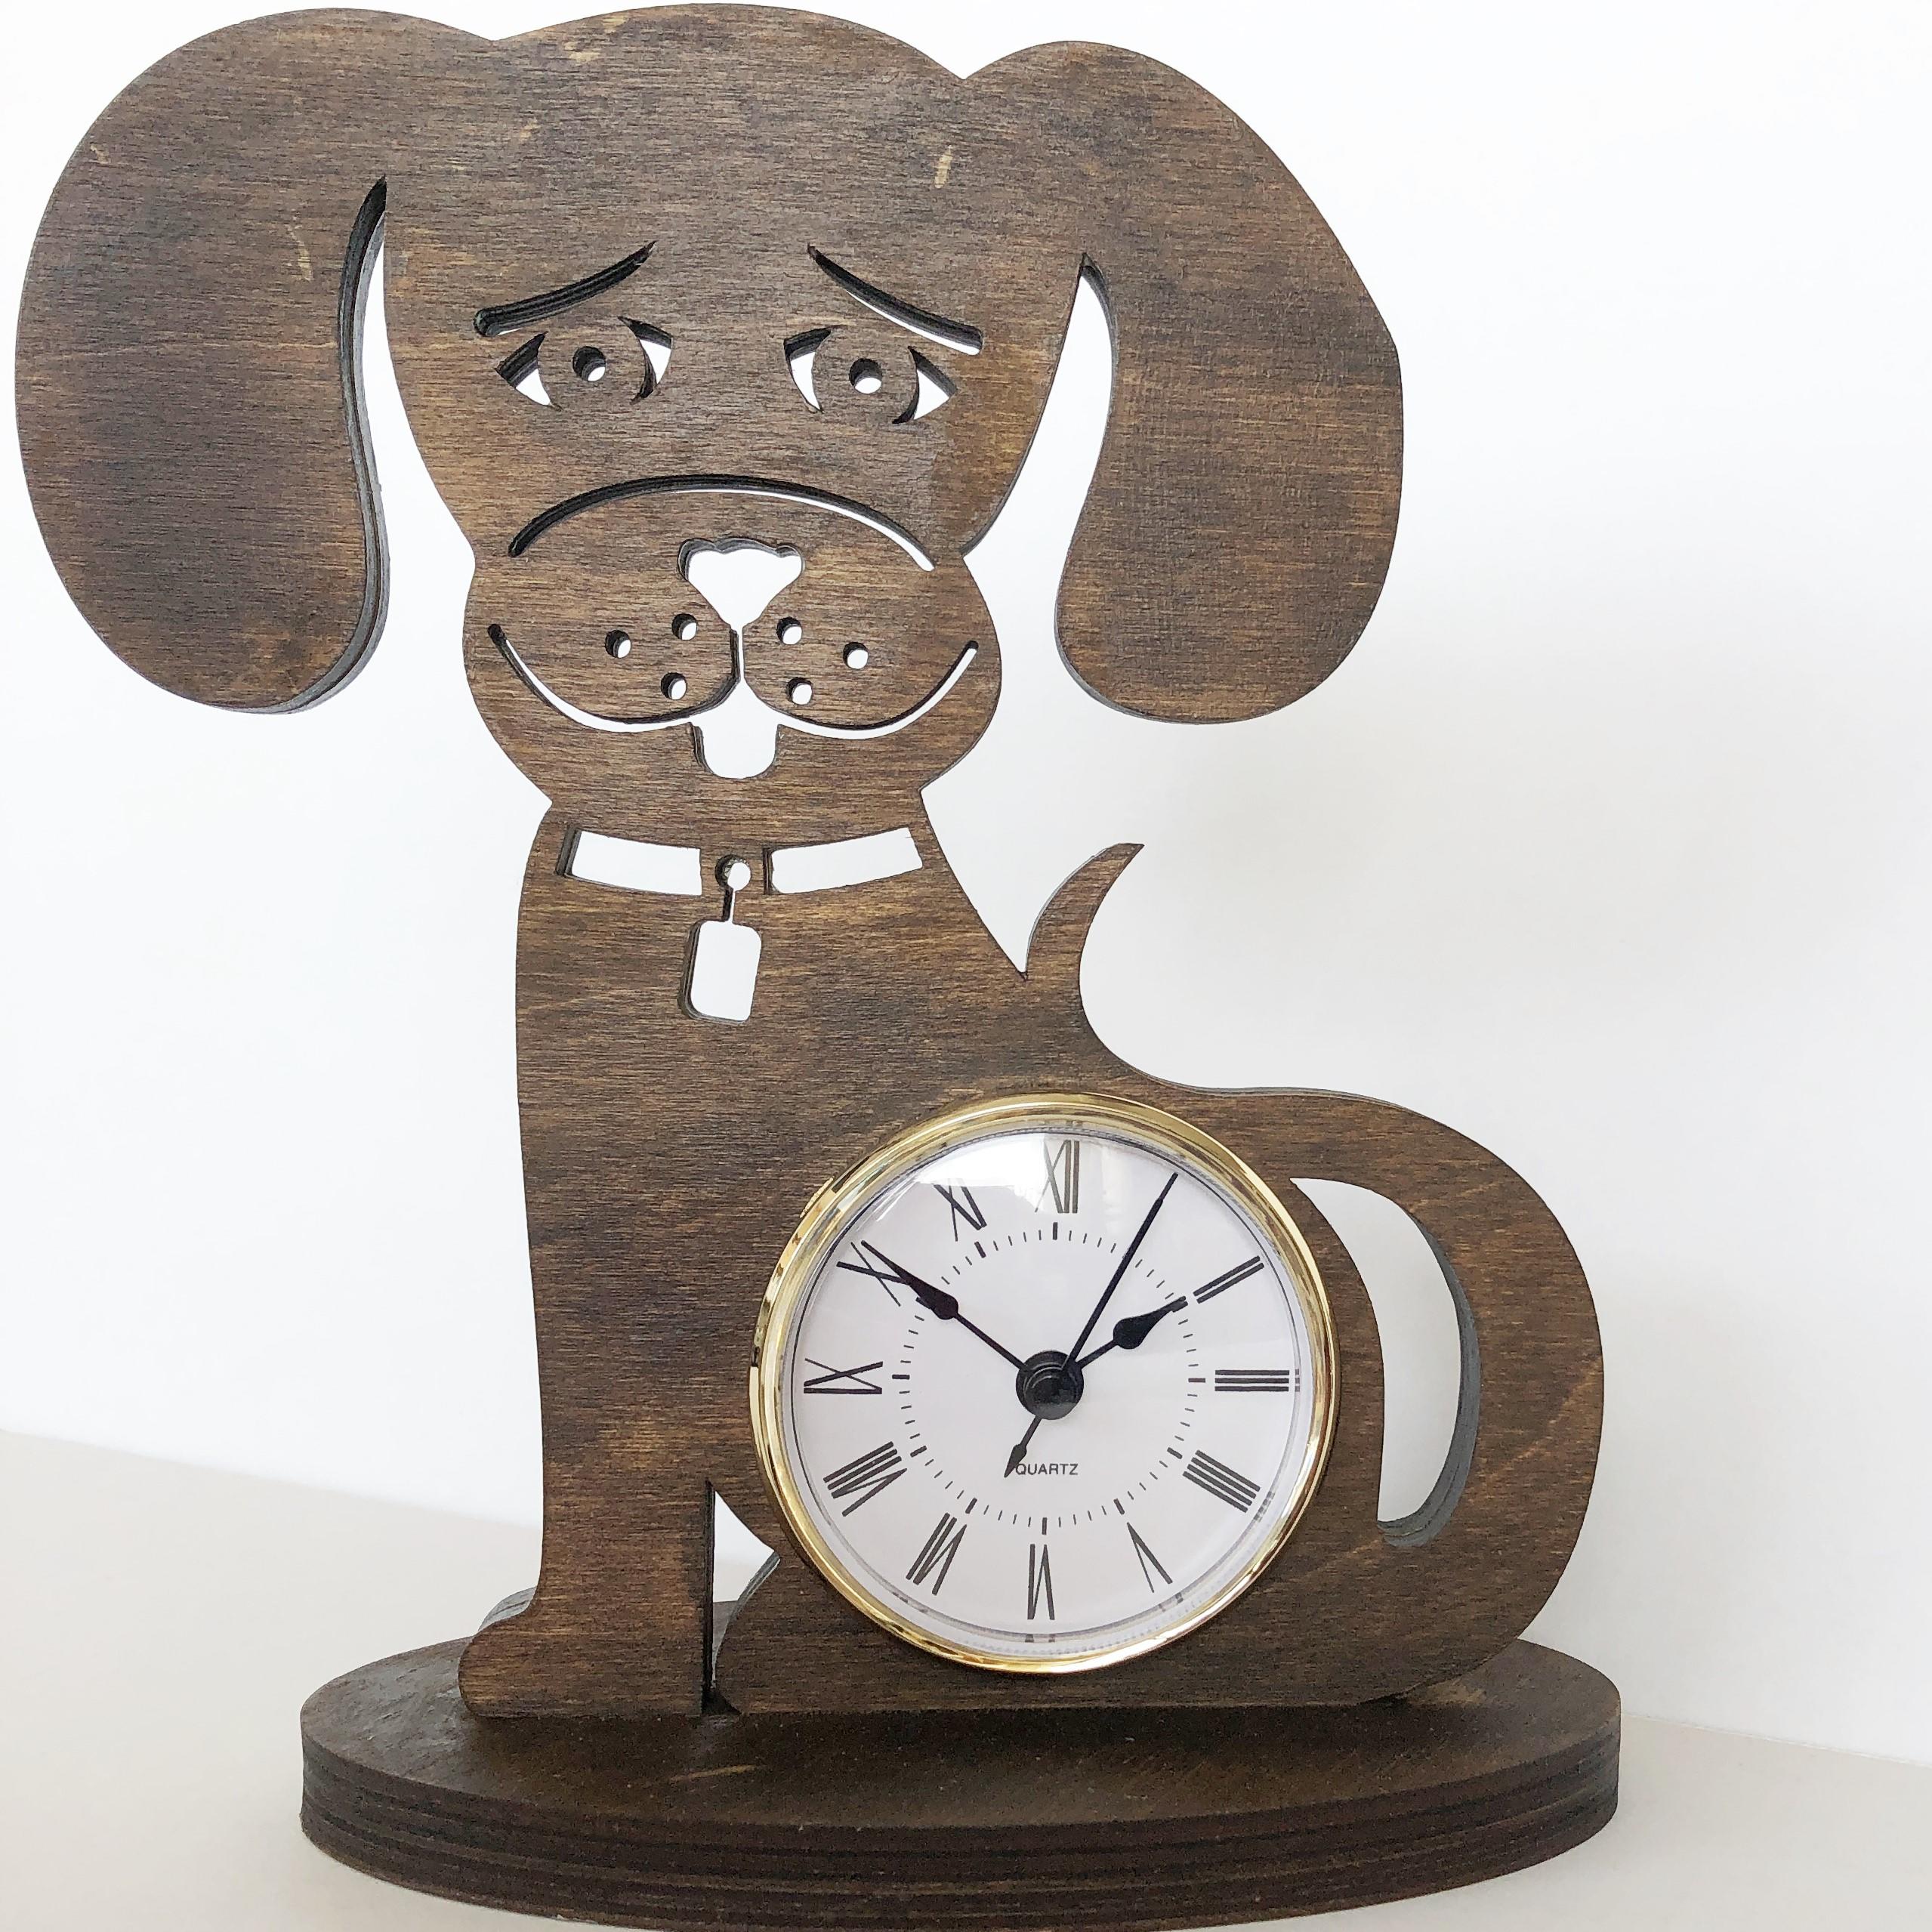 Cute puppy clock, laser cut plywood, stained dark oak colour with gold coloured quartz clock insert